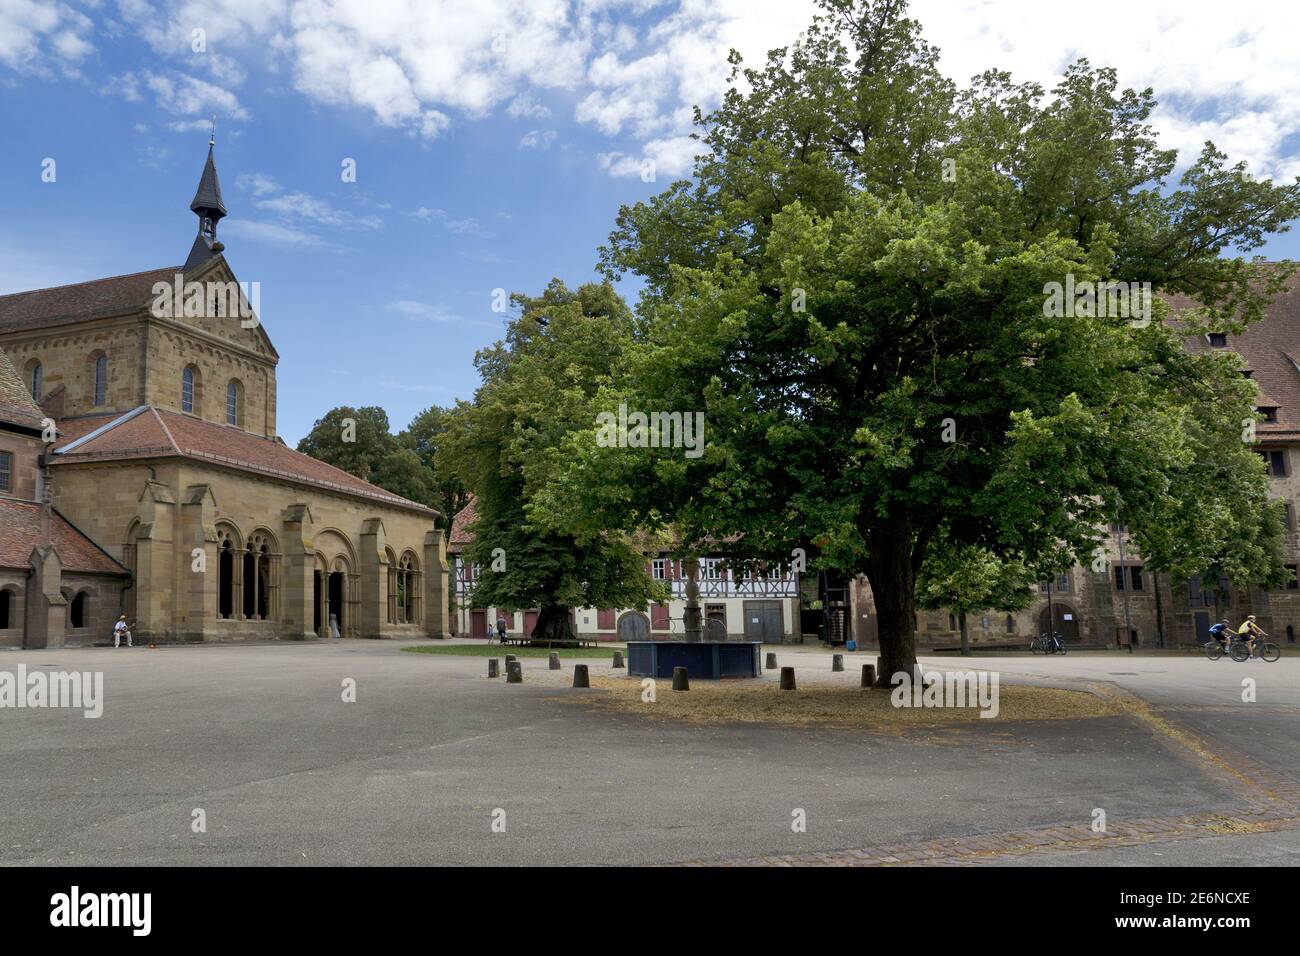 Maulbronn Monastery from outside, Germany: is a former Cistercian abbey located at Maulbronn, Baden-Württemberg. Stock Photo